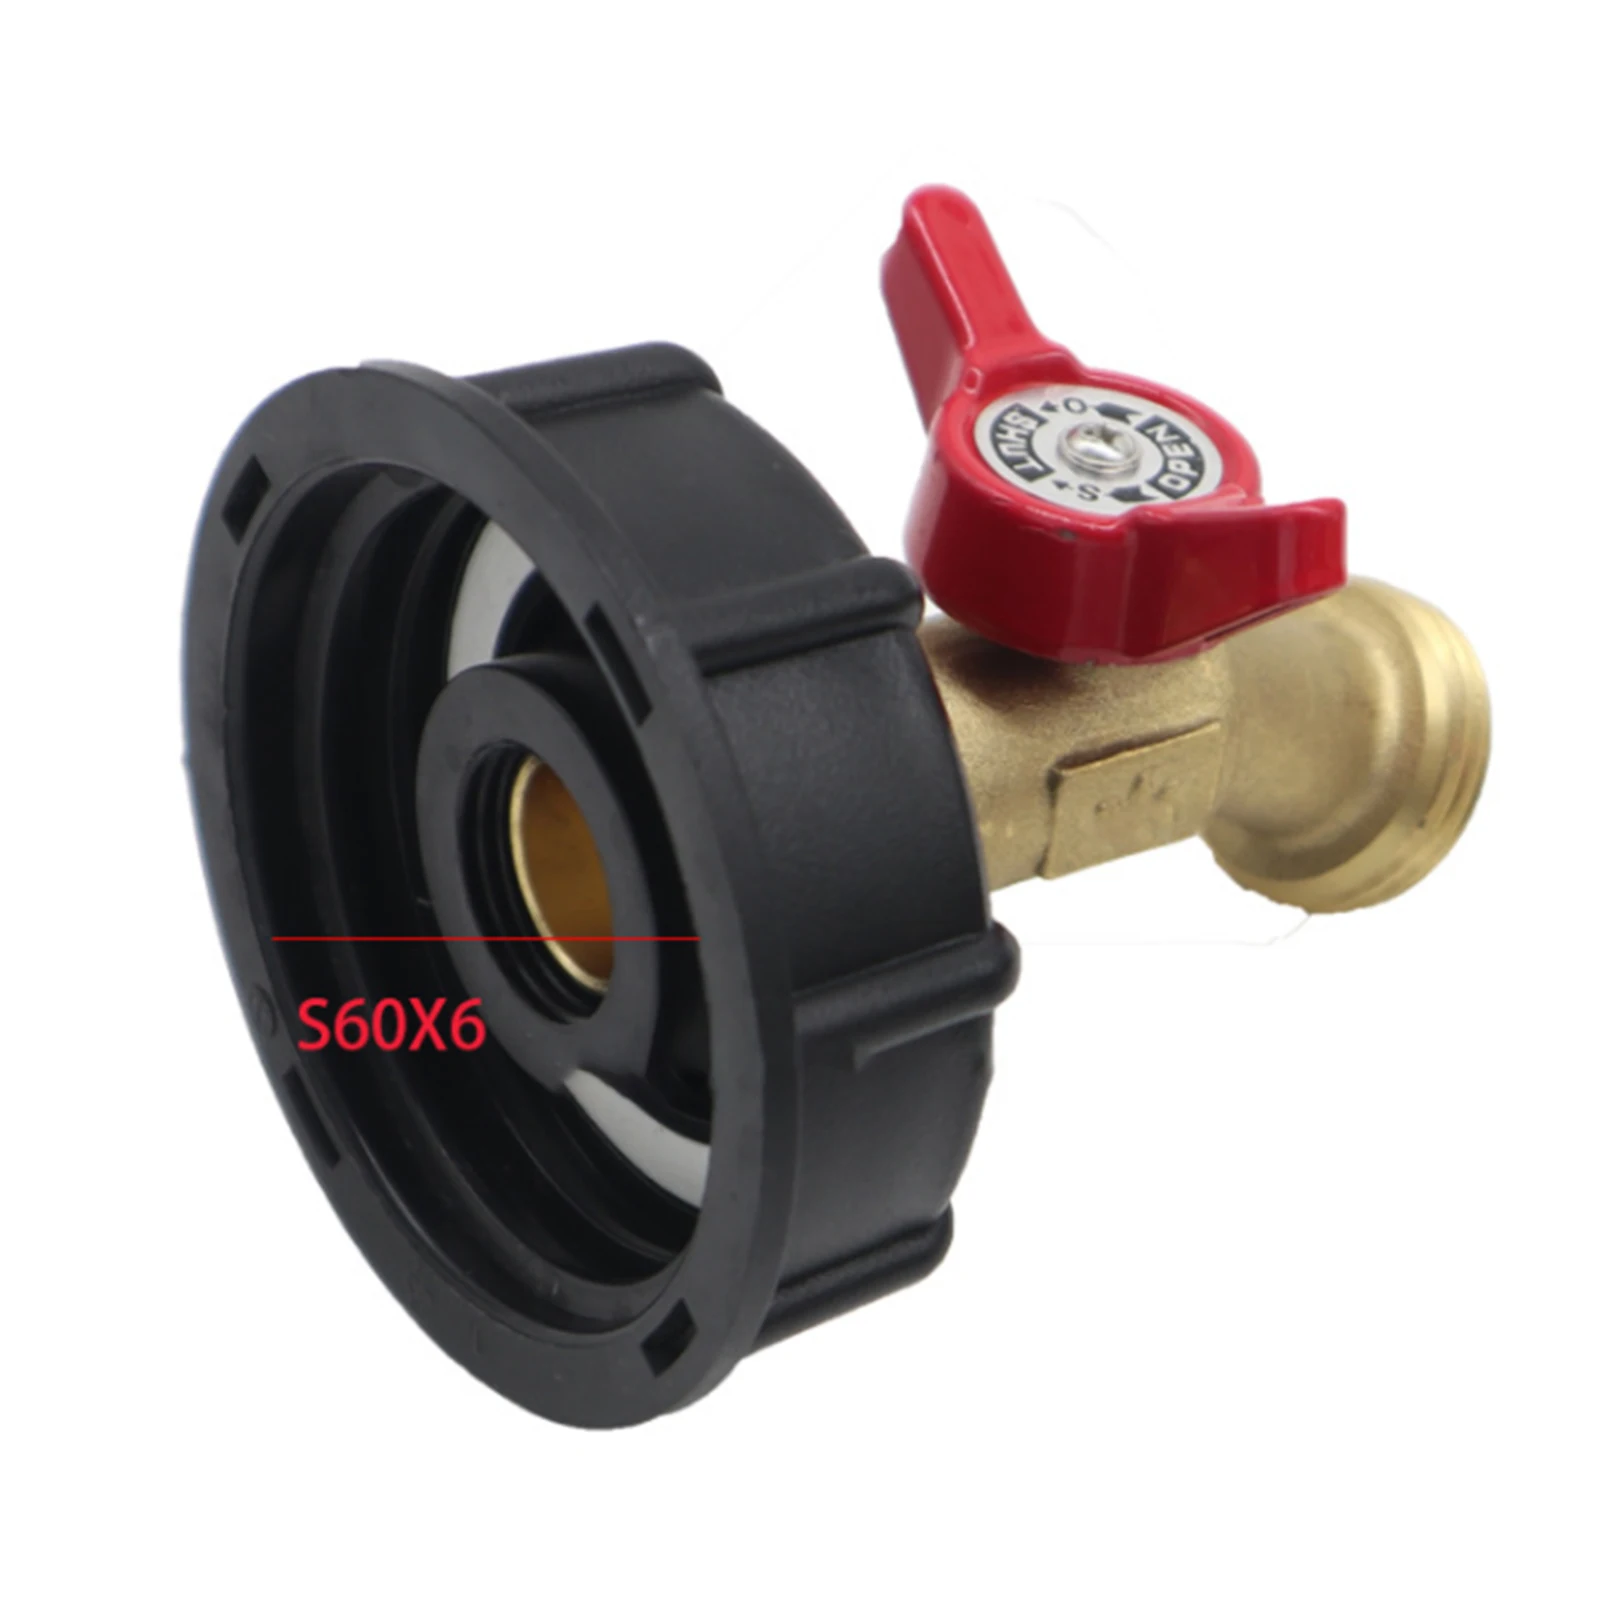 IBC Tote Water Tank Adapter Hose Connector Connect Garden Hose Coarse Thread Fine Chenzi IBC Tote Adapter,IBC Tote Fittings Having 1/2 Inch Brass Water Faucet with Shut-Off Valve with Ball Valve 